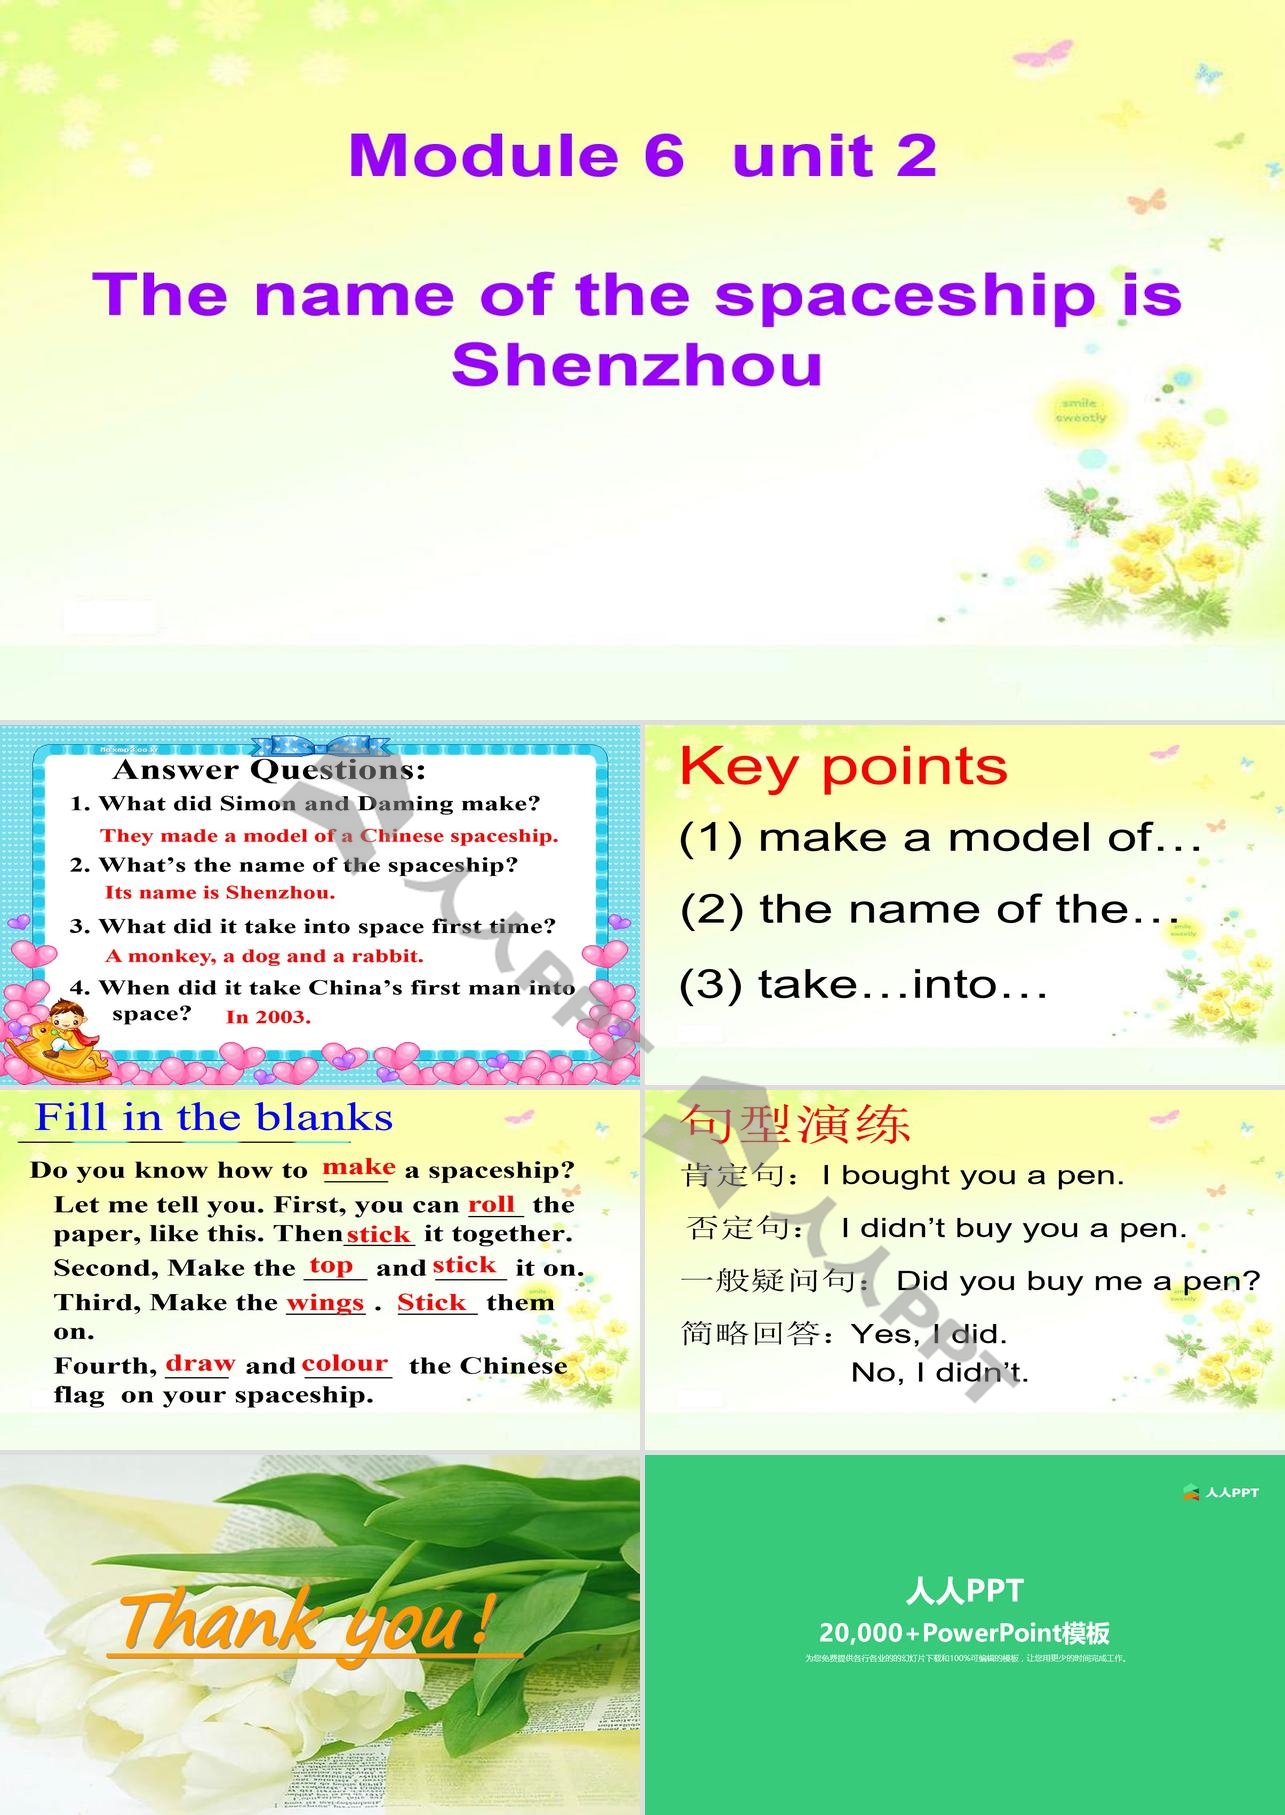 《The name of the spaceship is Shenzhou》PPT课件长图